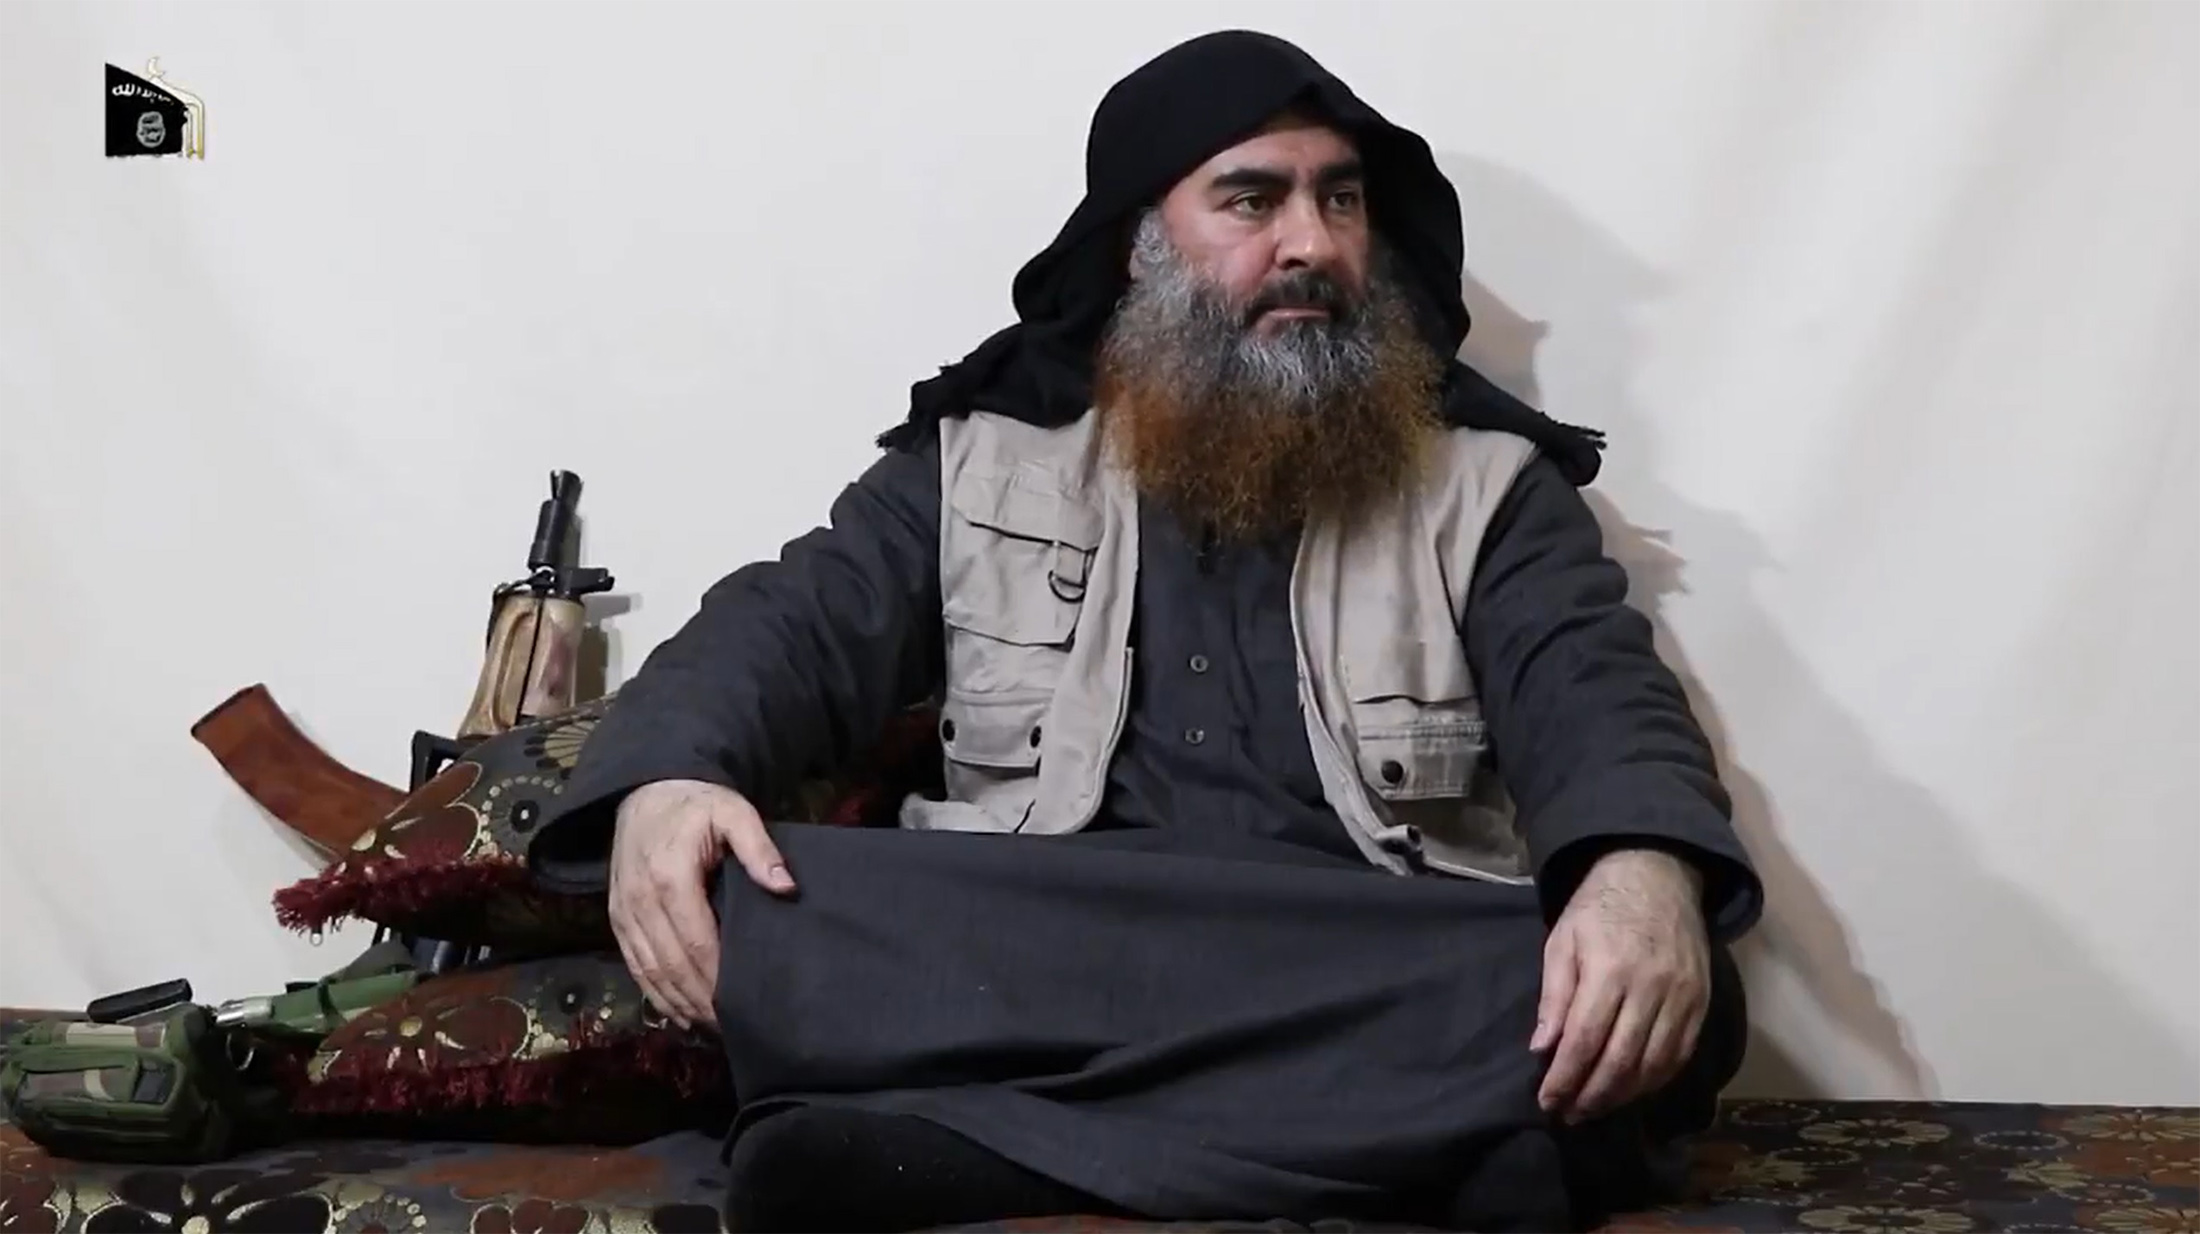 A screen grab from an undated video published by the Islamic State media wing Al Furqan network shows Abu Bakr al-Baghdadi at an undisclosed location.